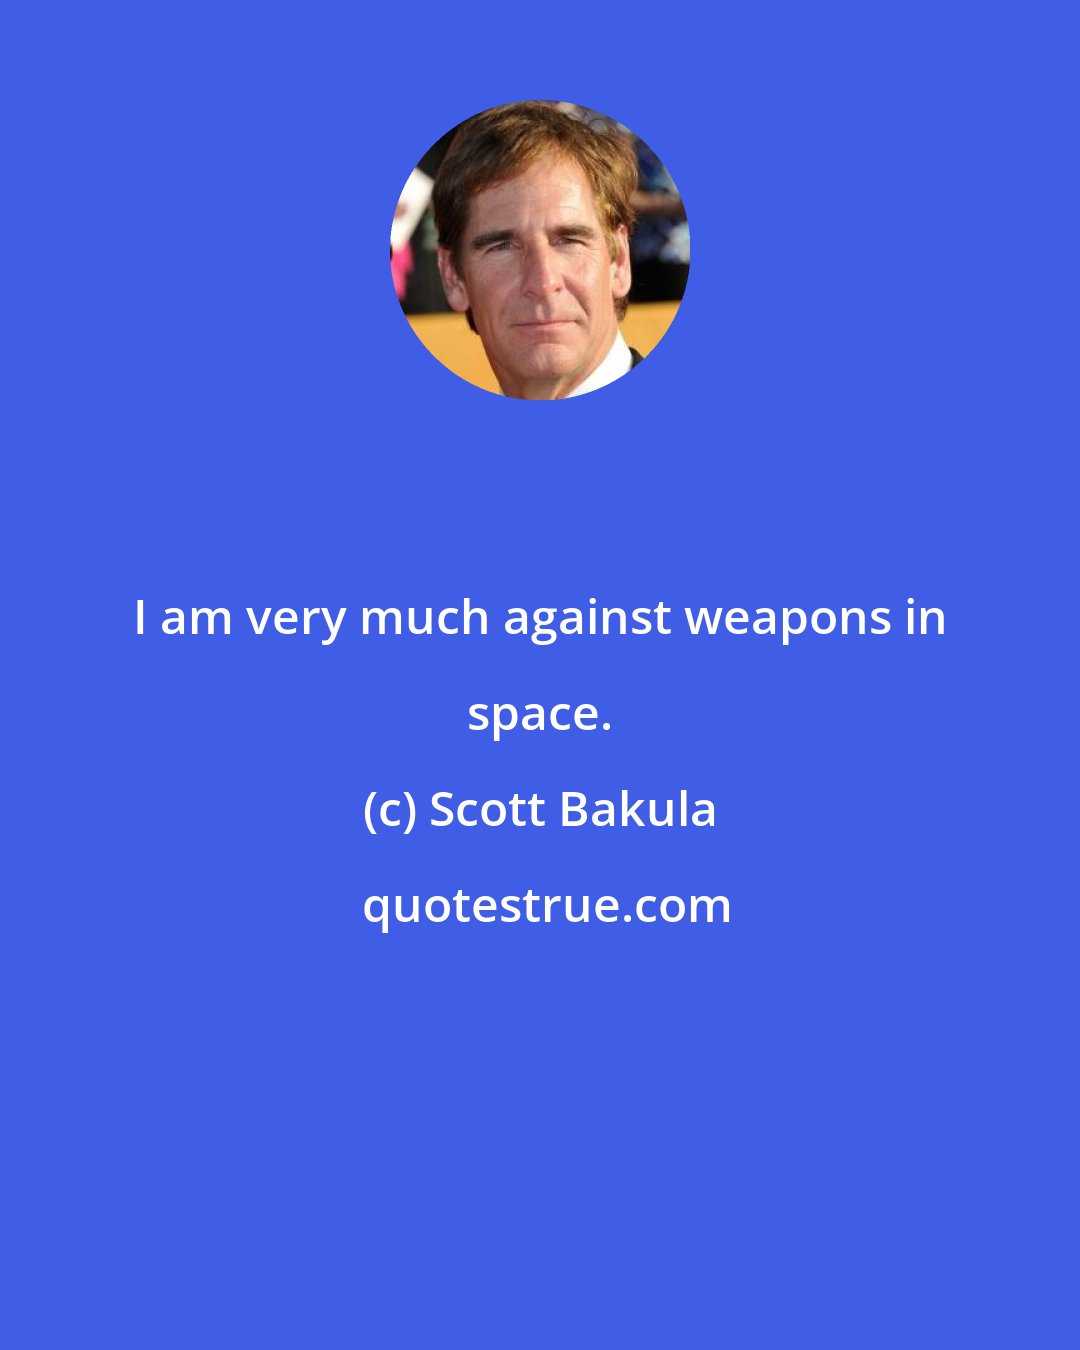 Scott Bakula: I am very much against weapons in space.